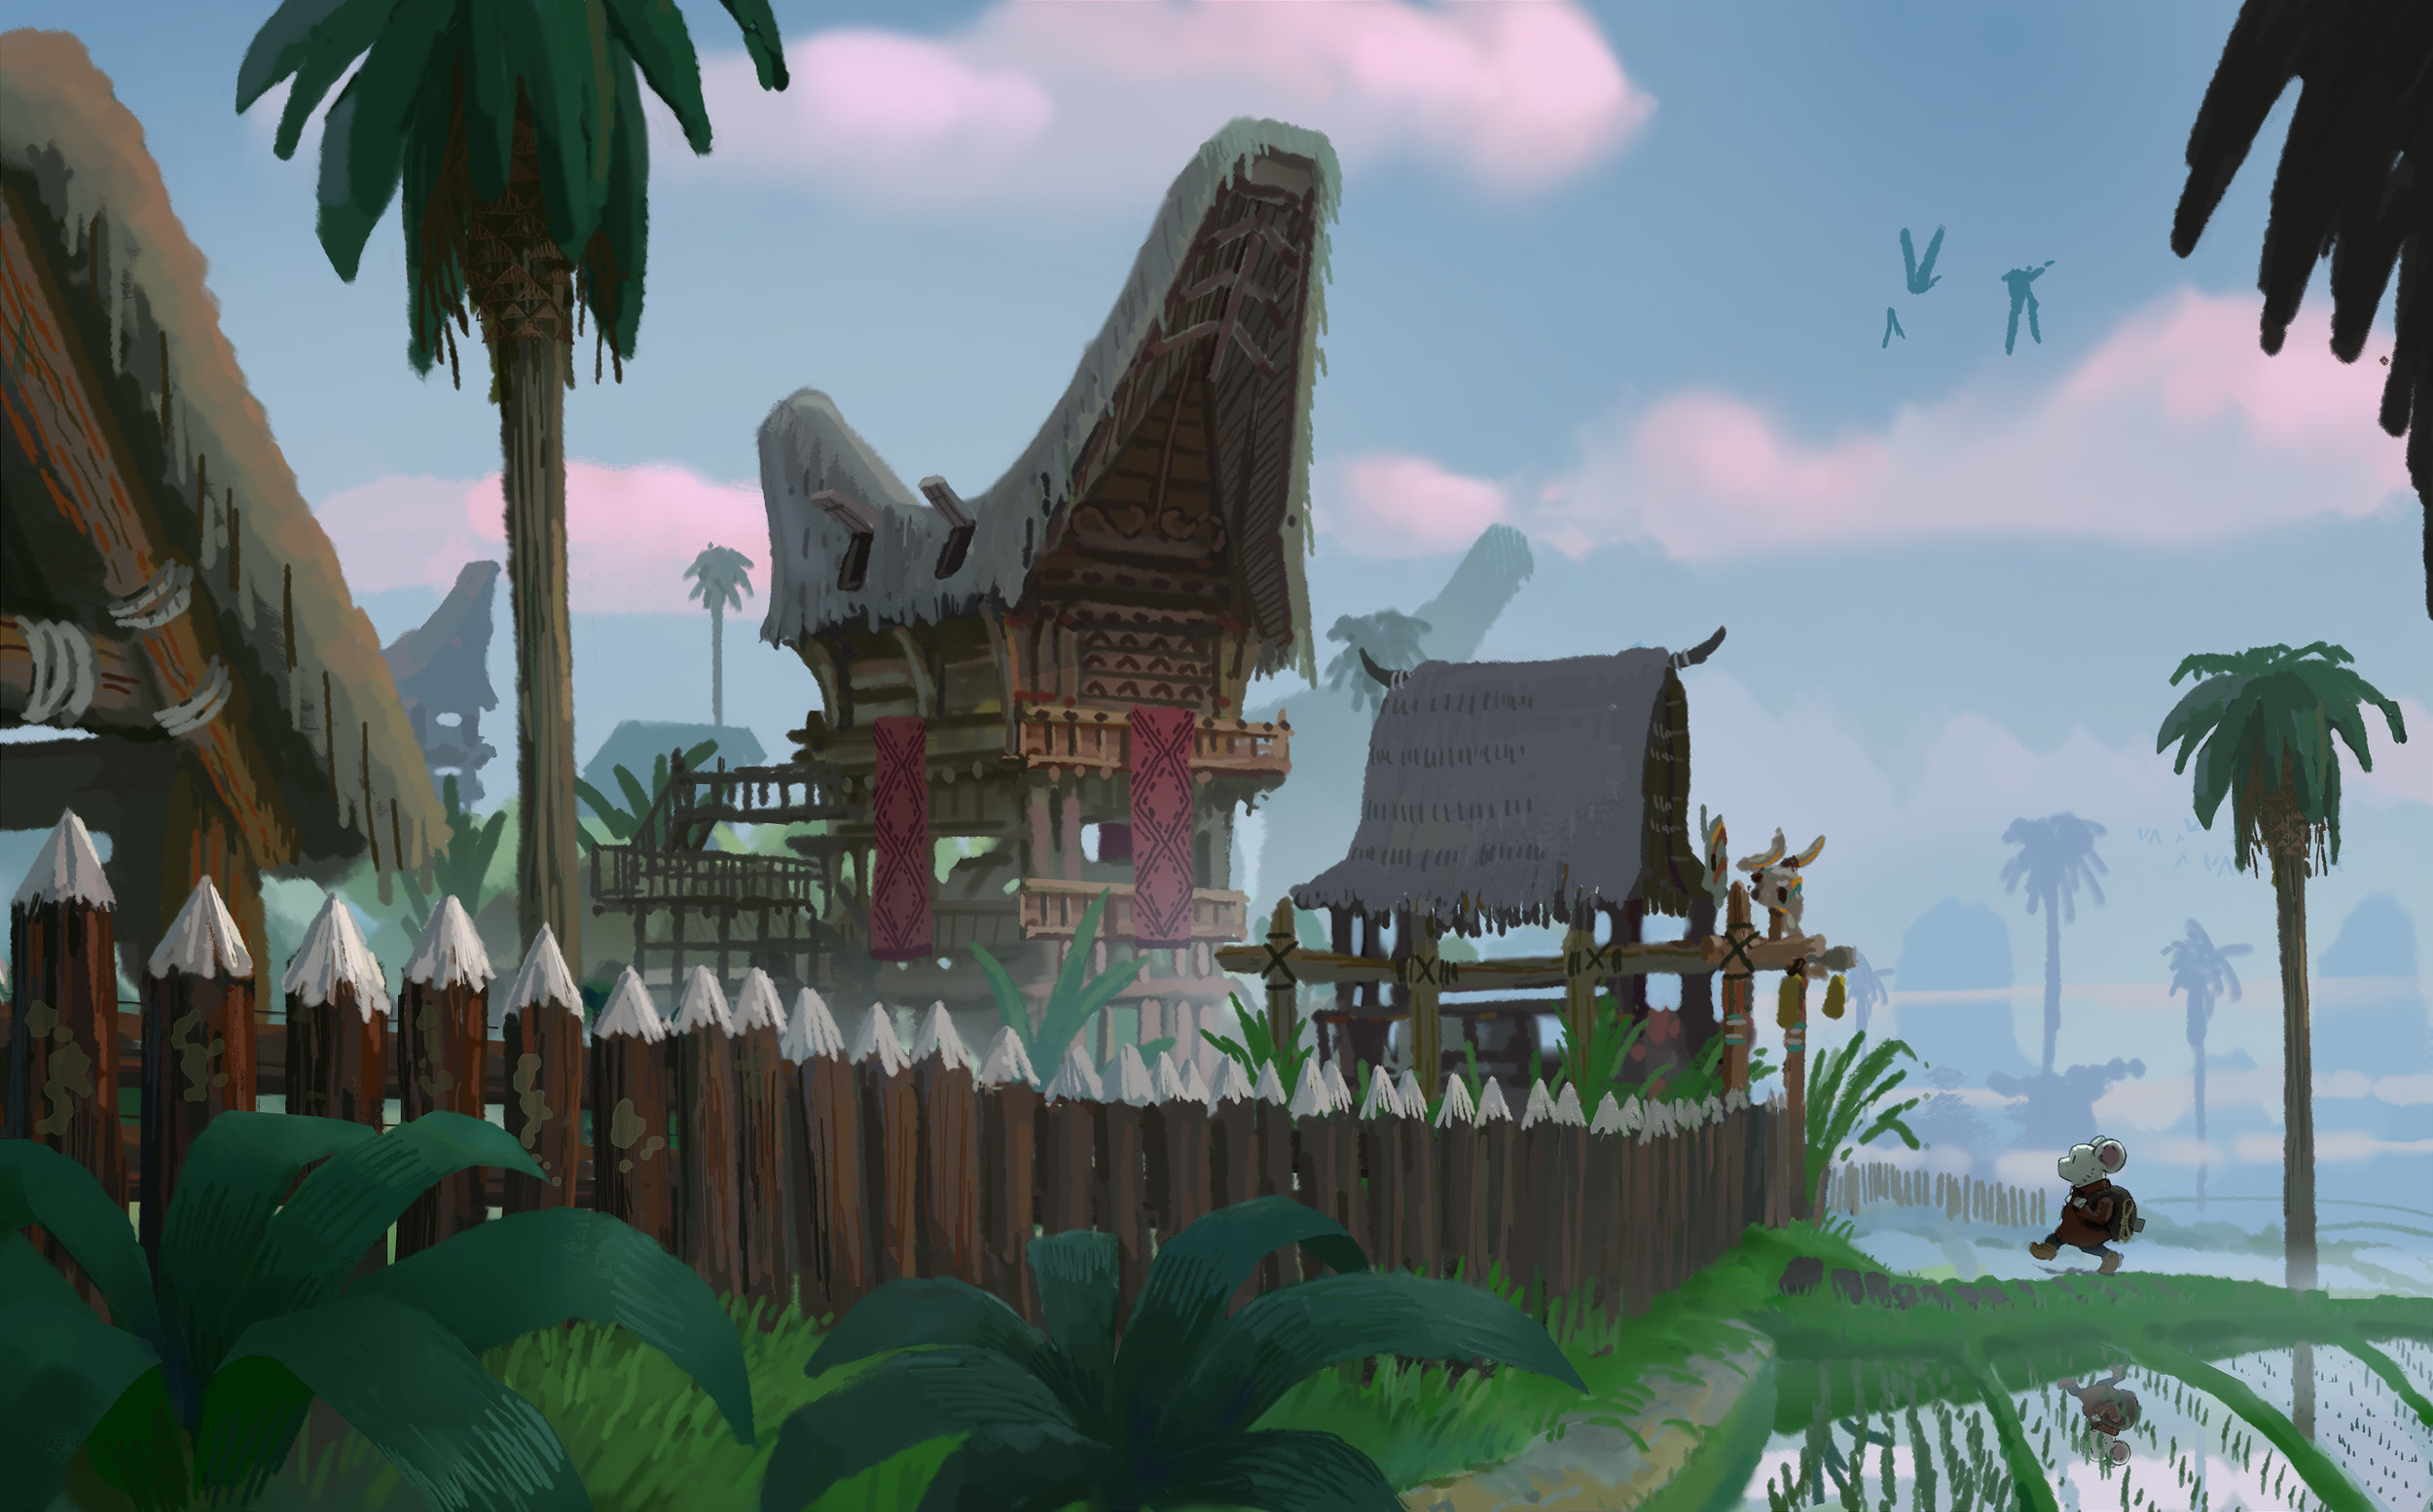 Ryo Yambe Rodent Clouds Backpacks Fence Wood Fence Trees Palm Trees Water Birds Plants Mice Anthro 2500x1554